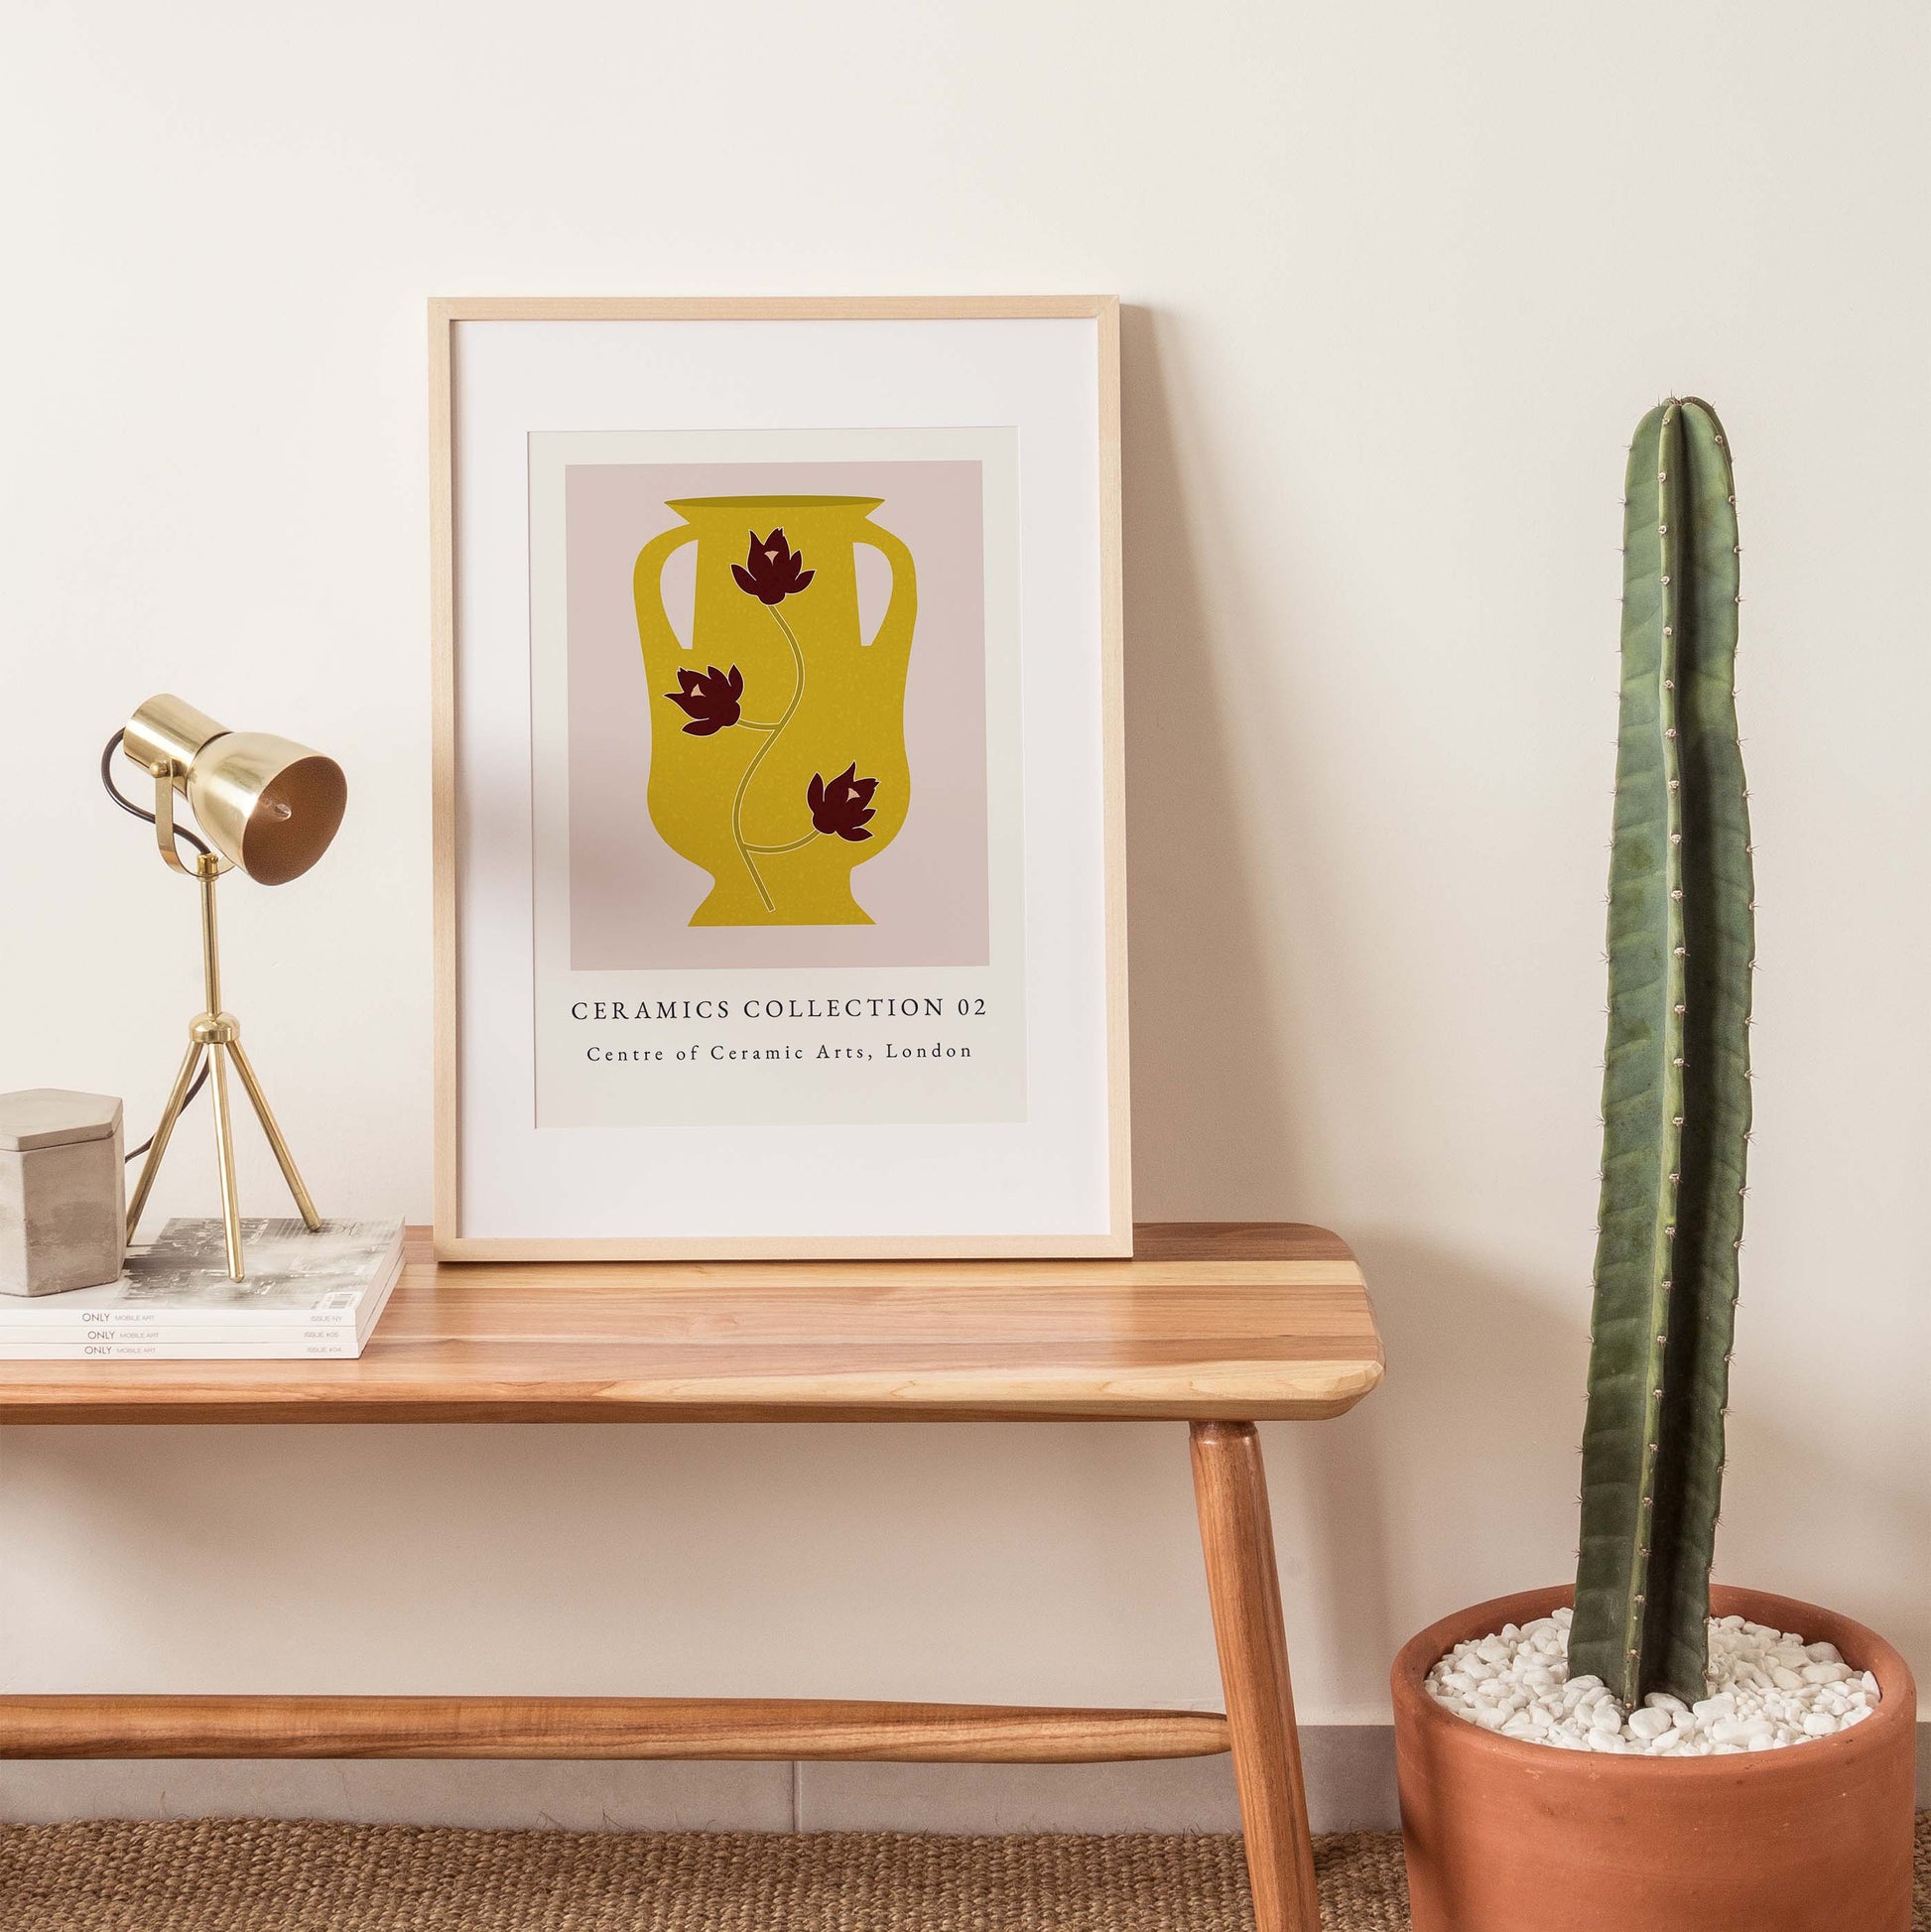 Exhibition poster with yellow vase from ceramic collection